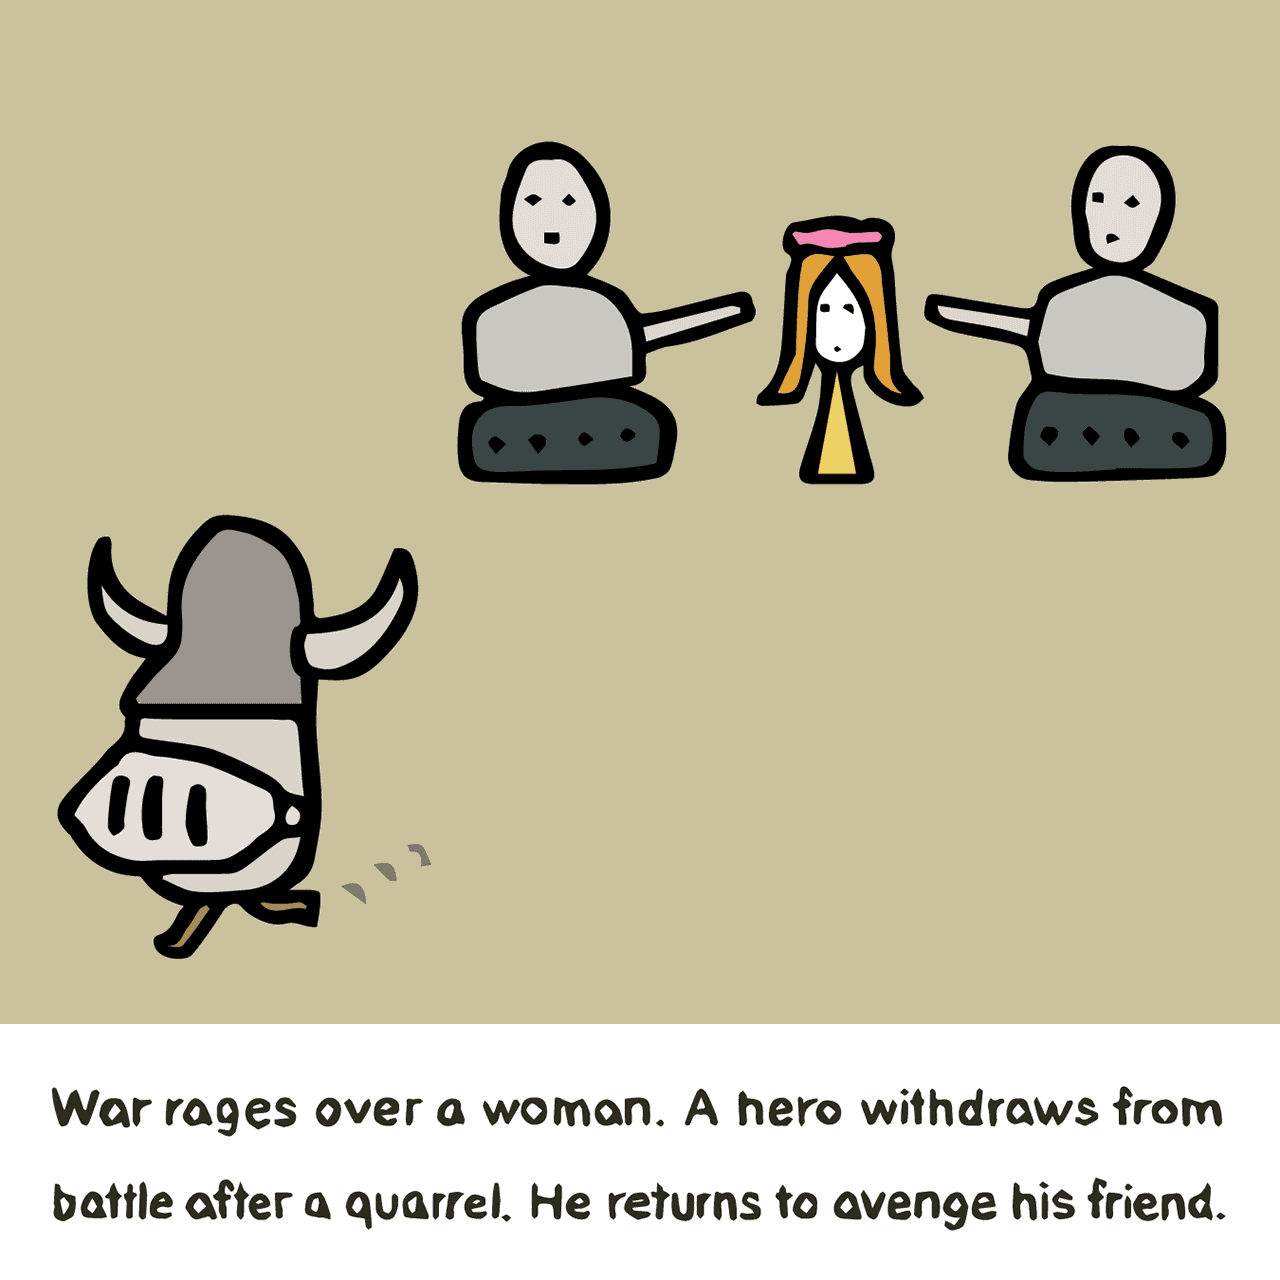 Homer "Iliad : War rages over a woman. A hero withdraws from battle after a quarrel. He returns to avenge his friend."